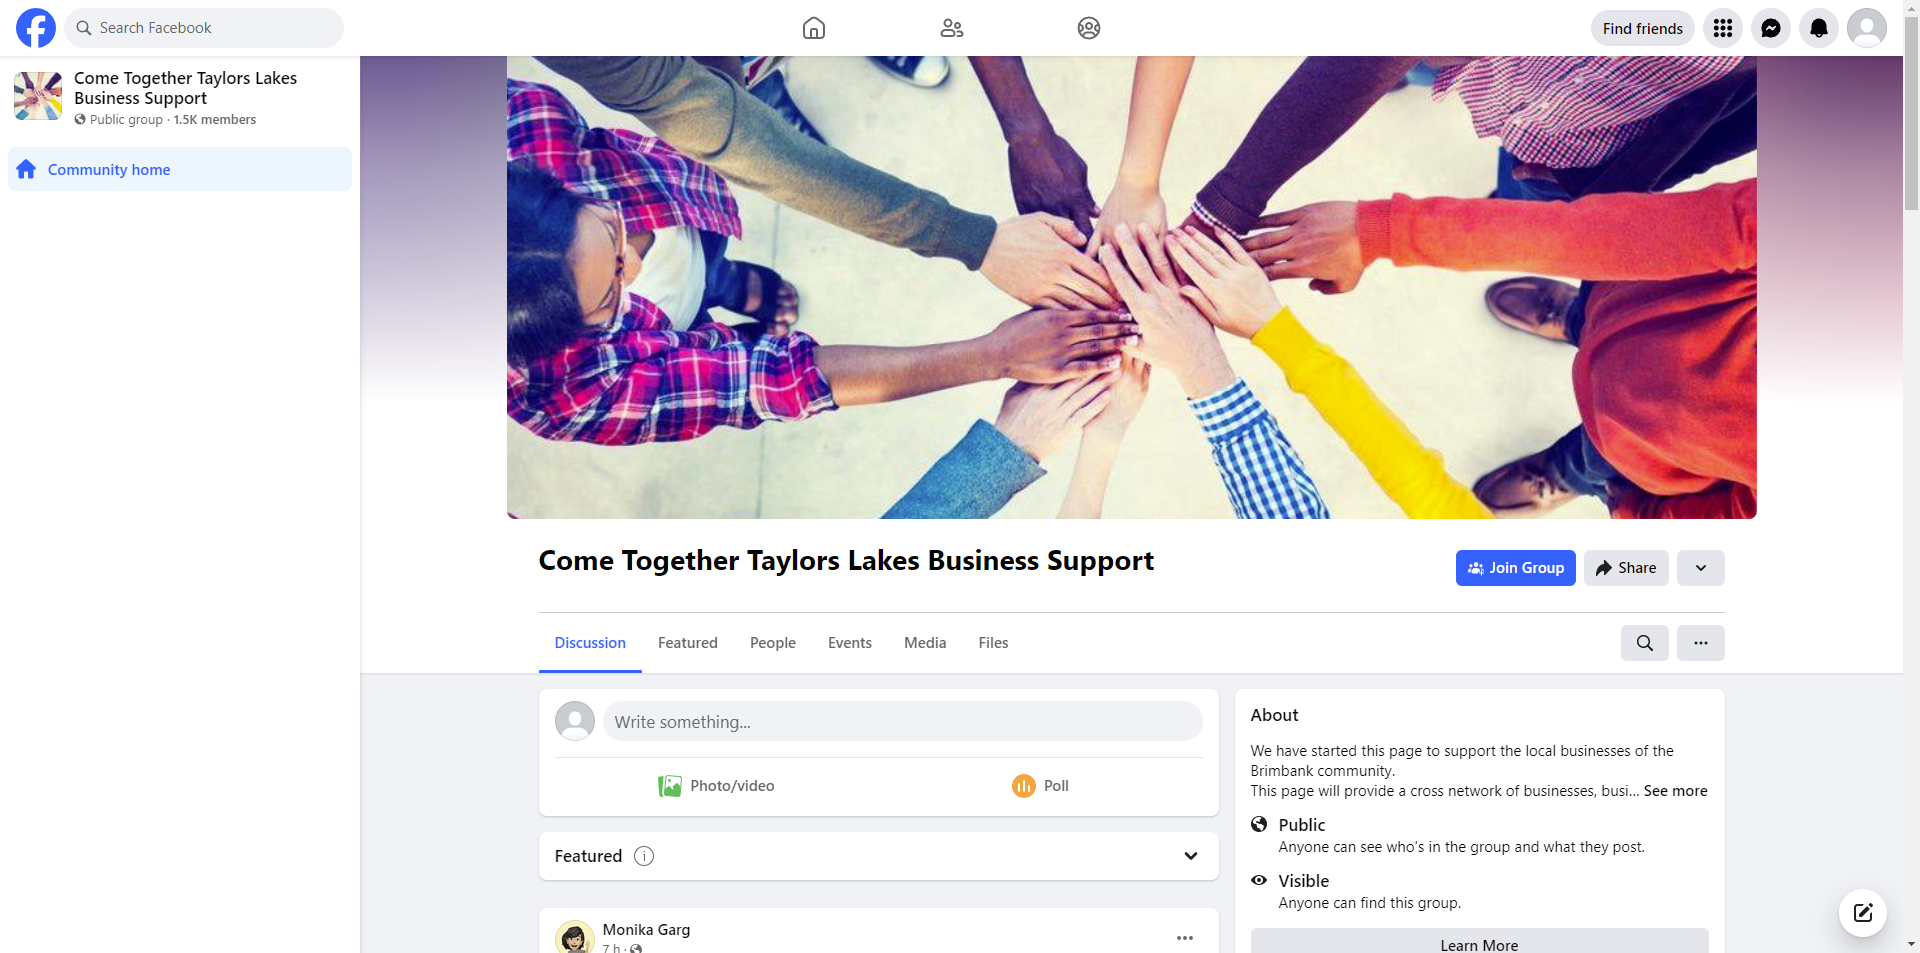 Come Together Taylors Lakes Business Support